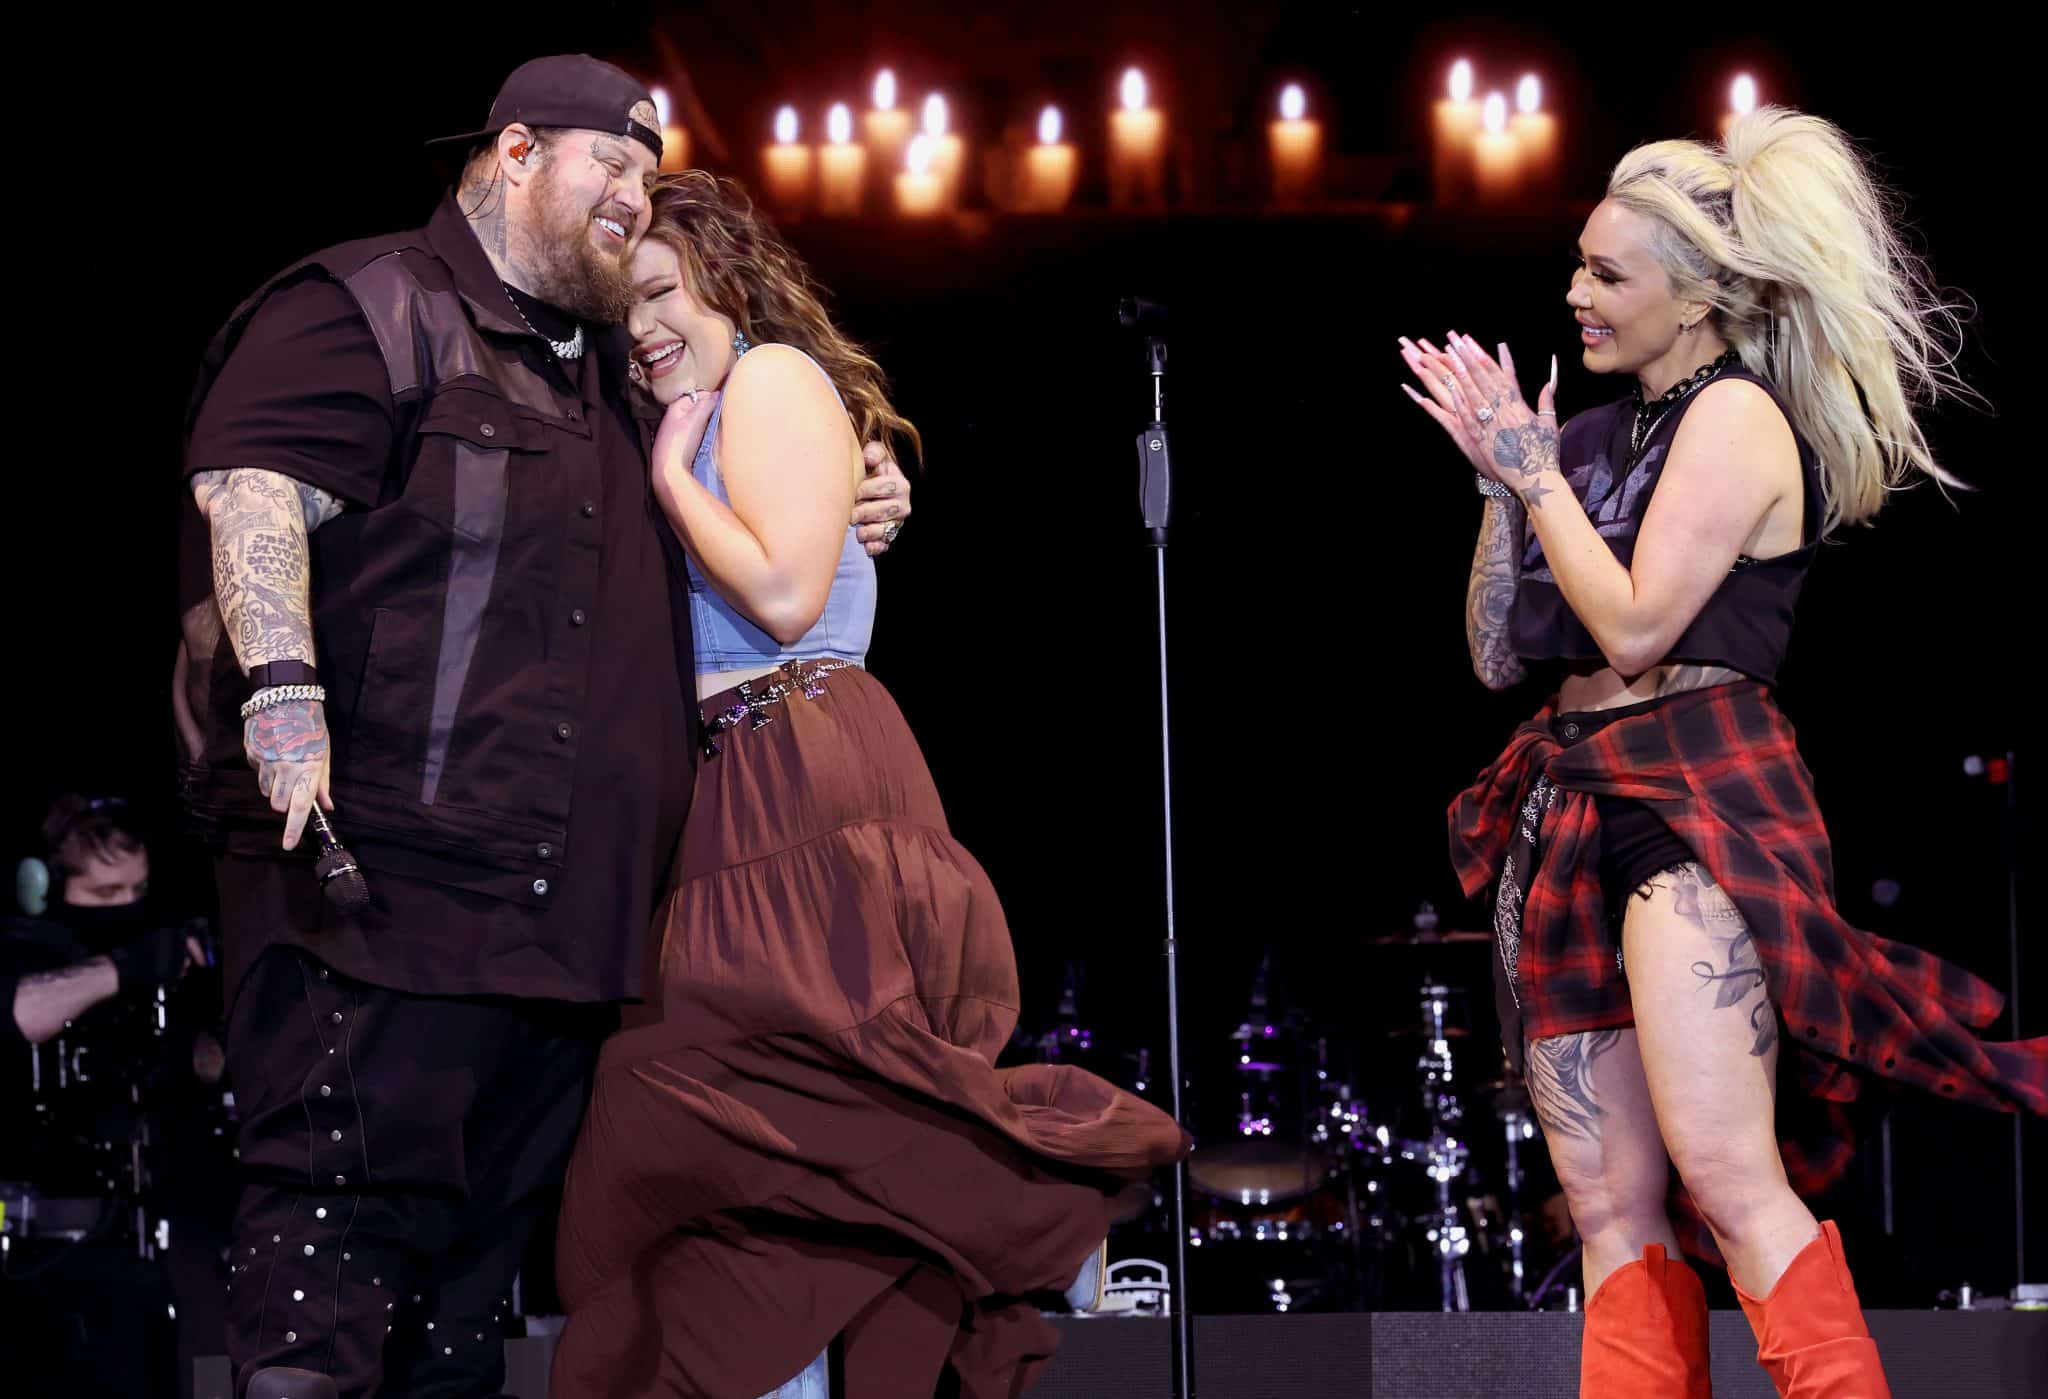 Jelly Roll and his wife Bunnie Xo onstage with daughter Bailee at Stagecoach